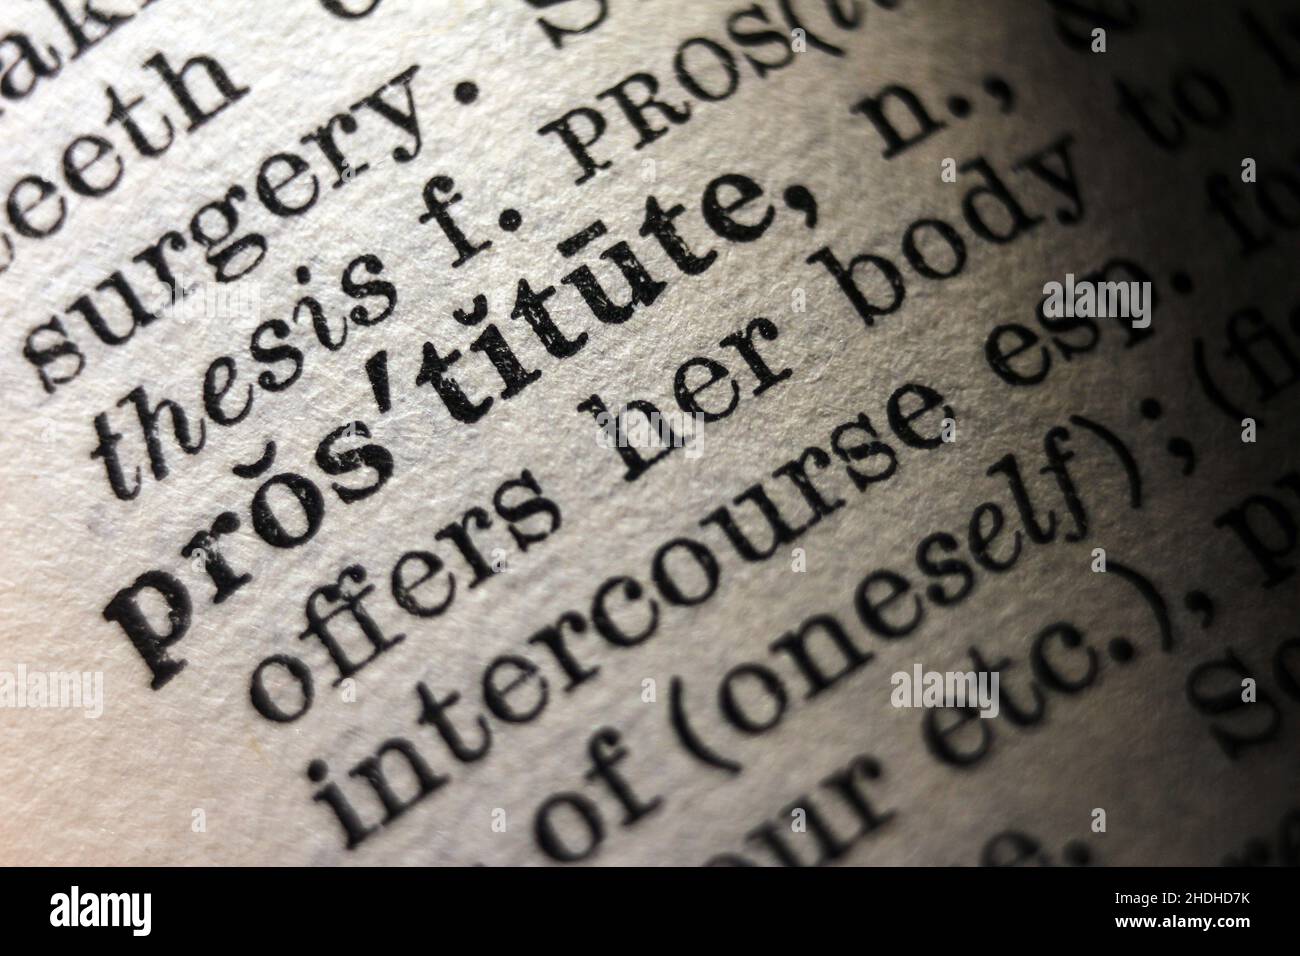 Word 'prostitute' printed on dictionary page, macro close-up Stock Photo